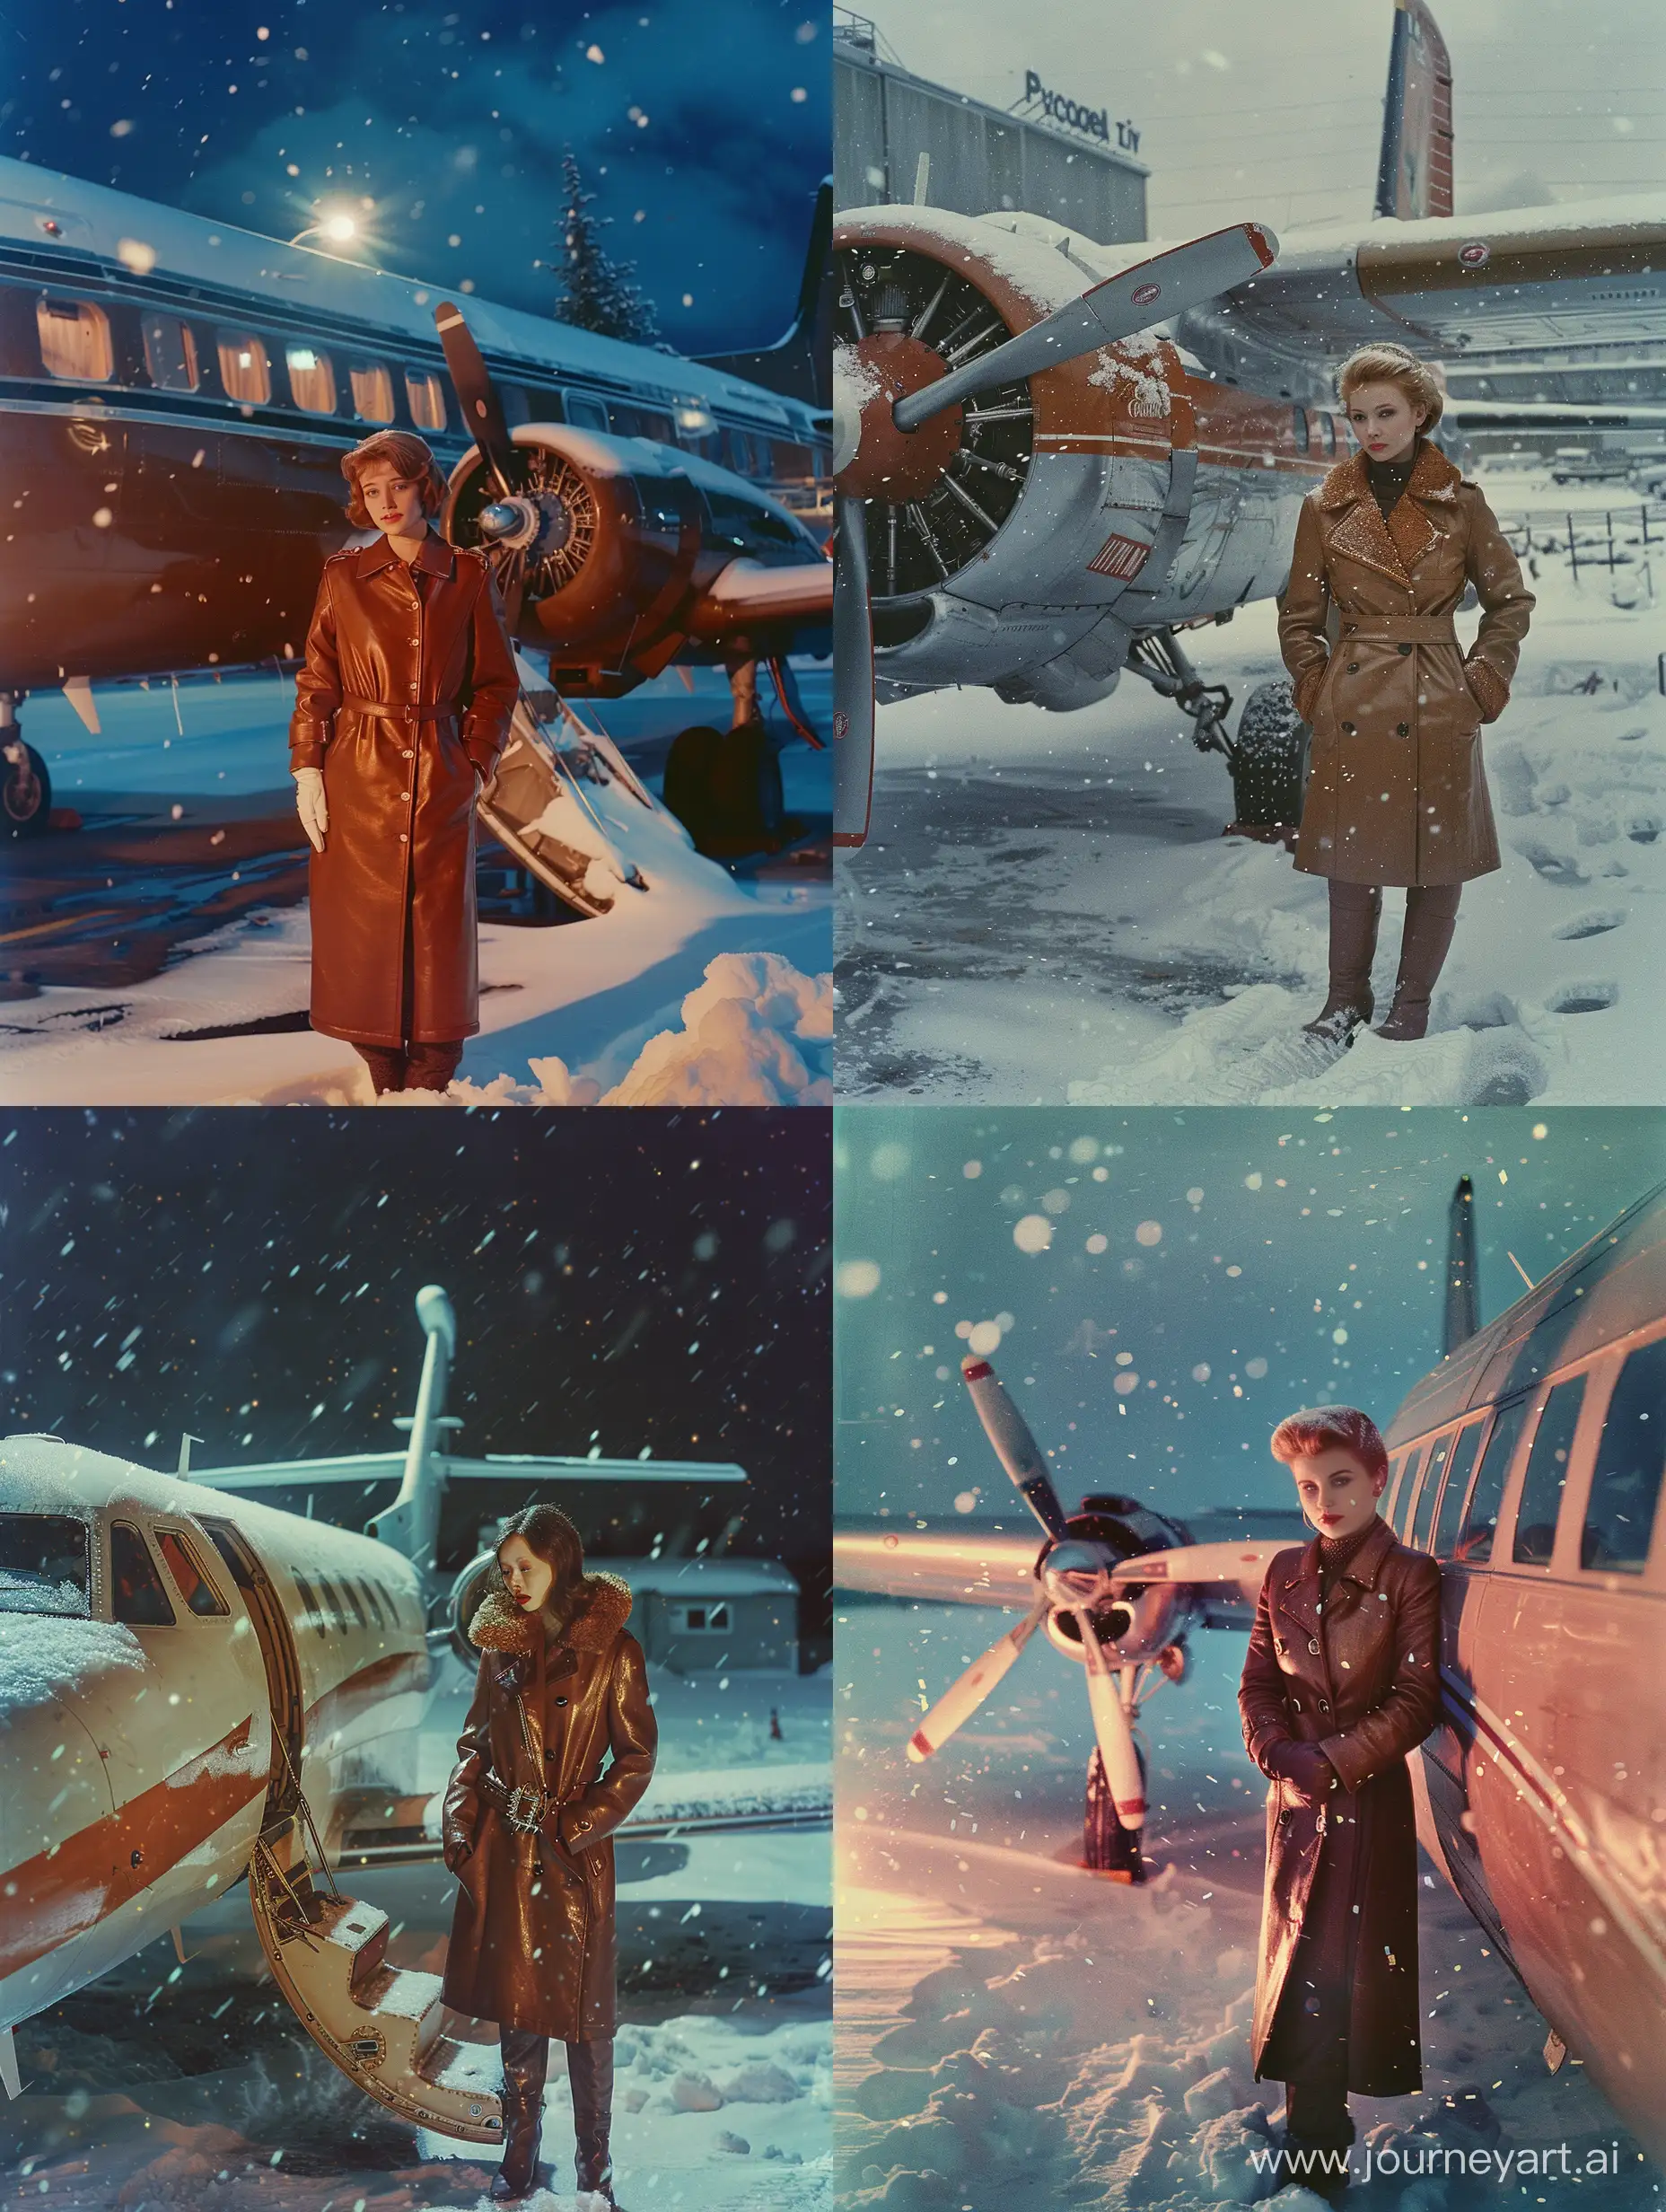 a woman standing next to a parked airplane in the snow, an album cover, tonalism, wearing a brown leather coat, perfectly lit. movie still, ffffound, volodymyr zelenskyy, young simon baker, wide open city ”, kodachrome 8 k, star